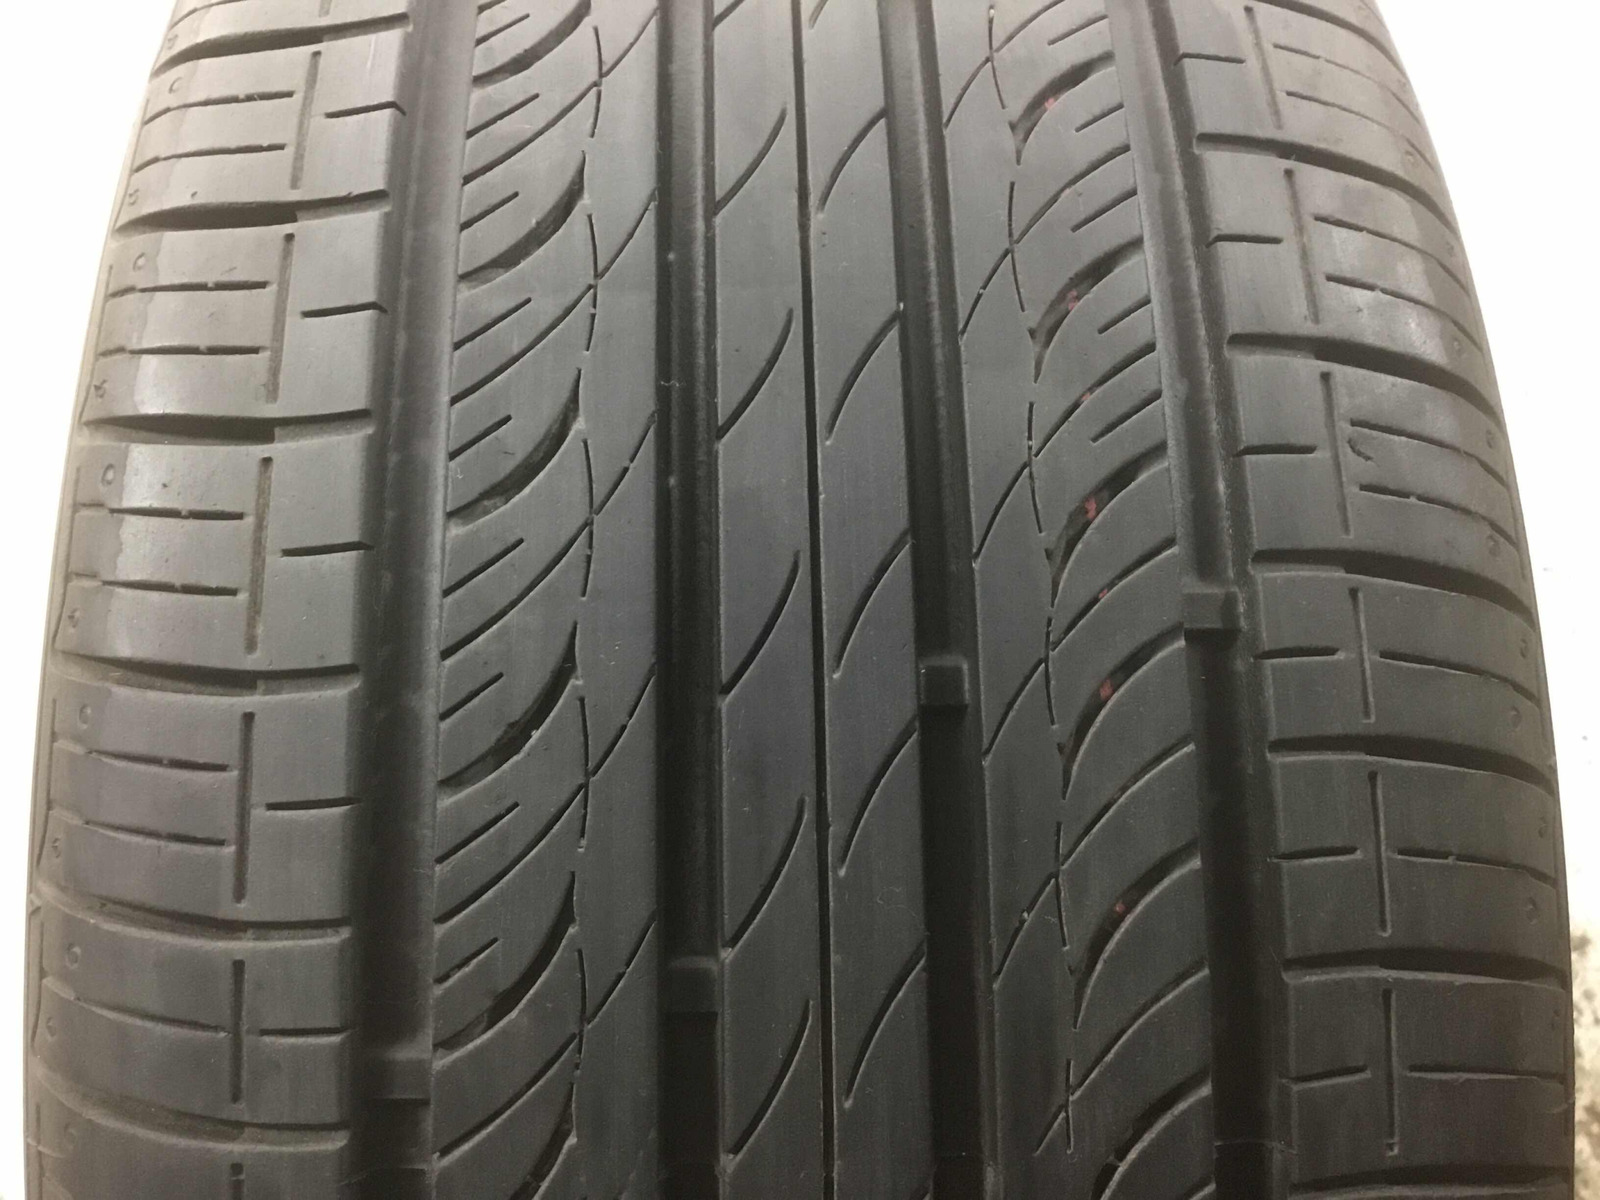 P215/45R17 Hankook Optimo H426 87 H Used 7/32nds